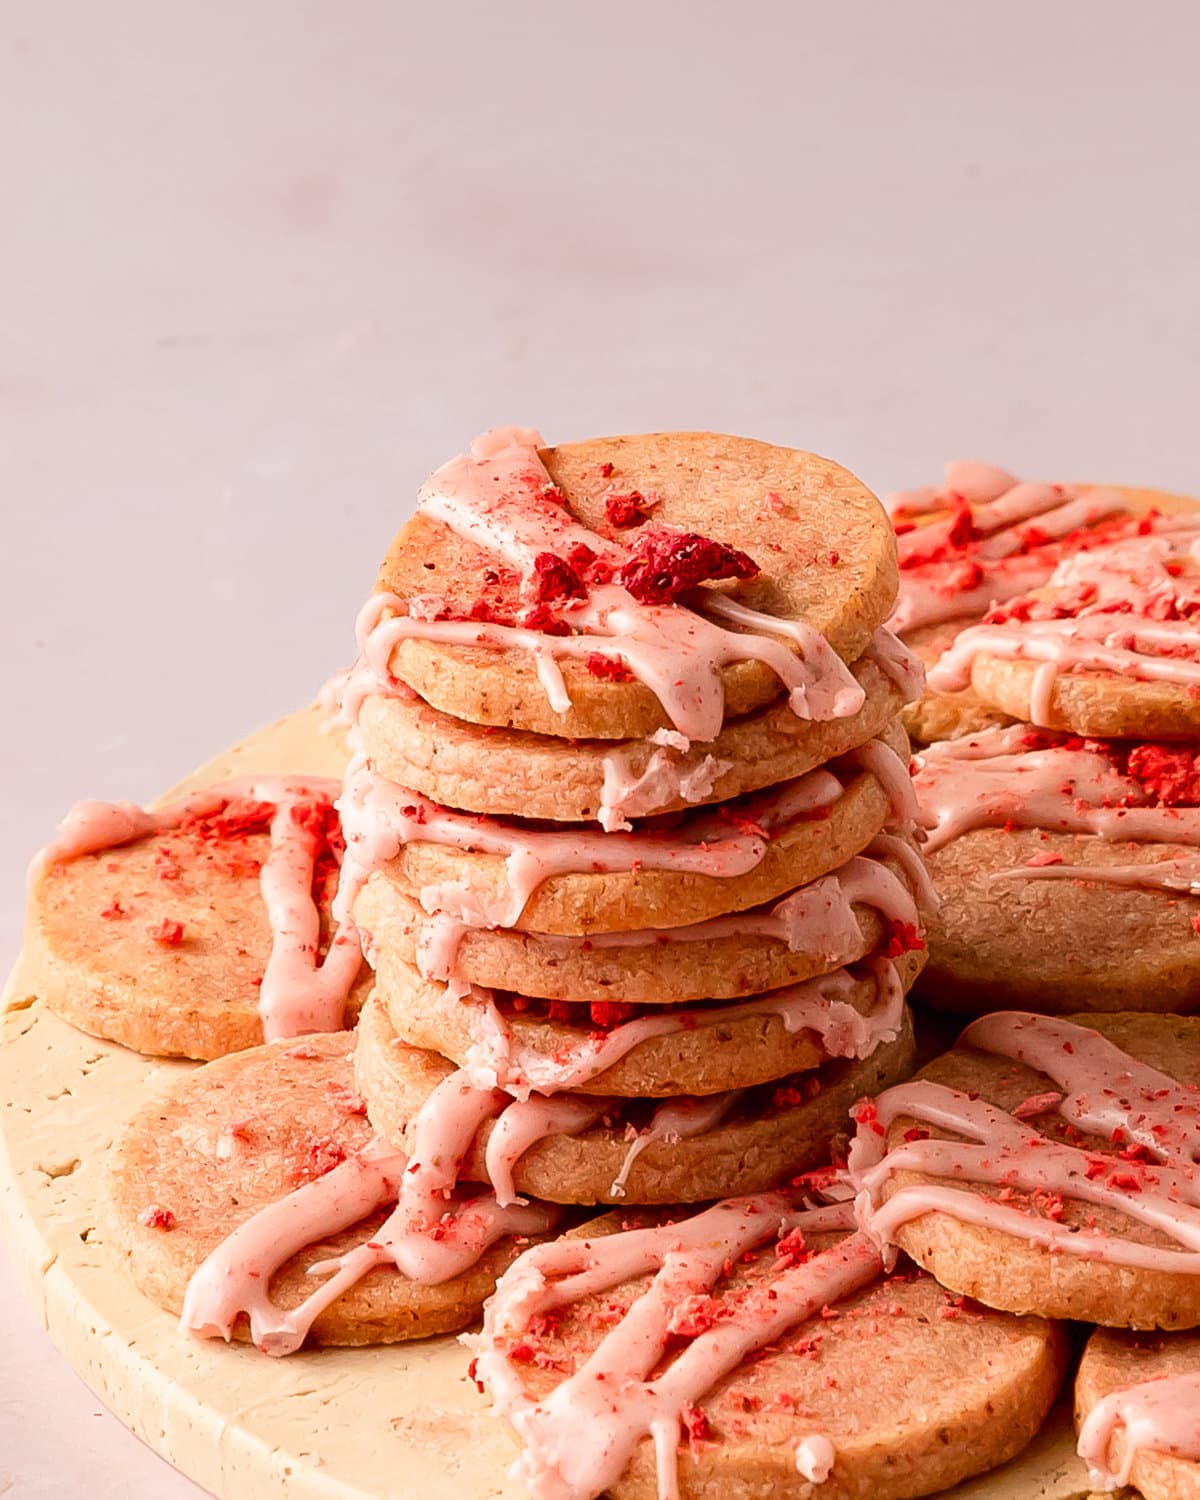 Strawberry shortbread cookies are buttery shortbread cookies filled with sweet and tart strawberry flavor. These strawberry butter cookies get their pink hue and berry flavor thanks to freeze dried strawberries in both the cookie and glaze. Make these pink shortbread cookies for a taste of spring and summer all year long.